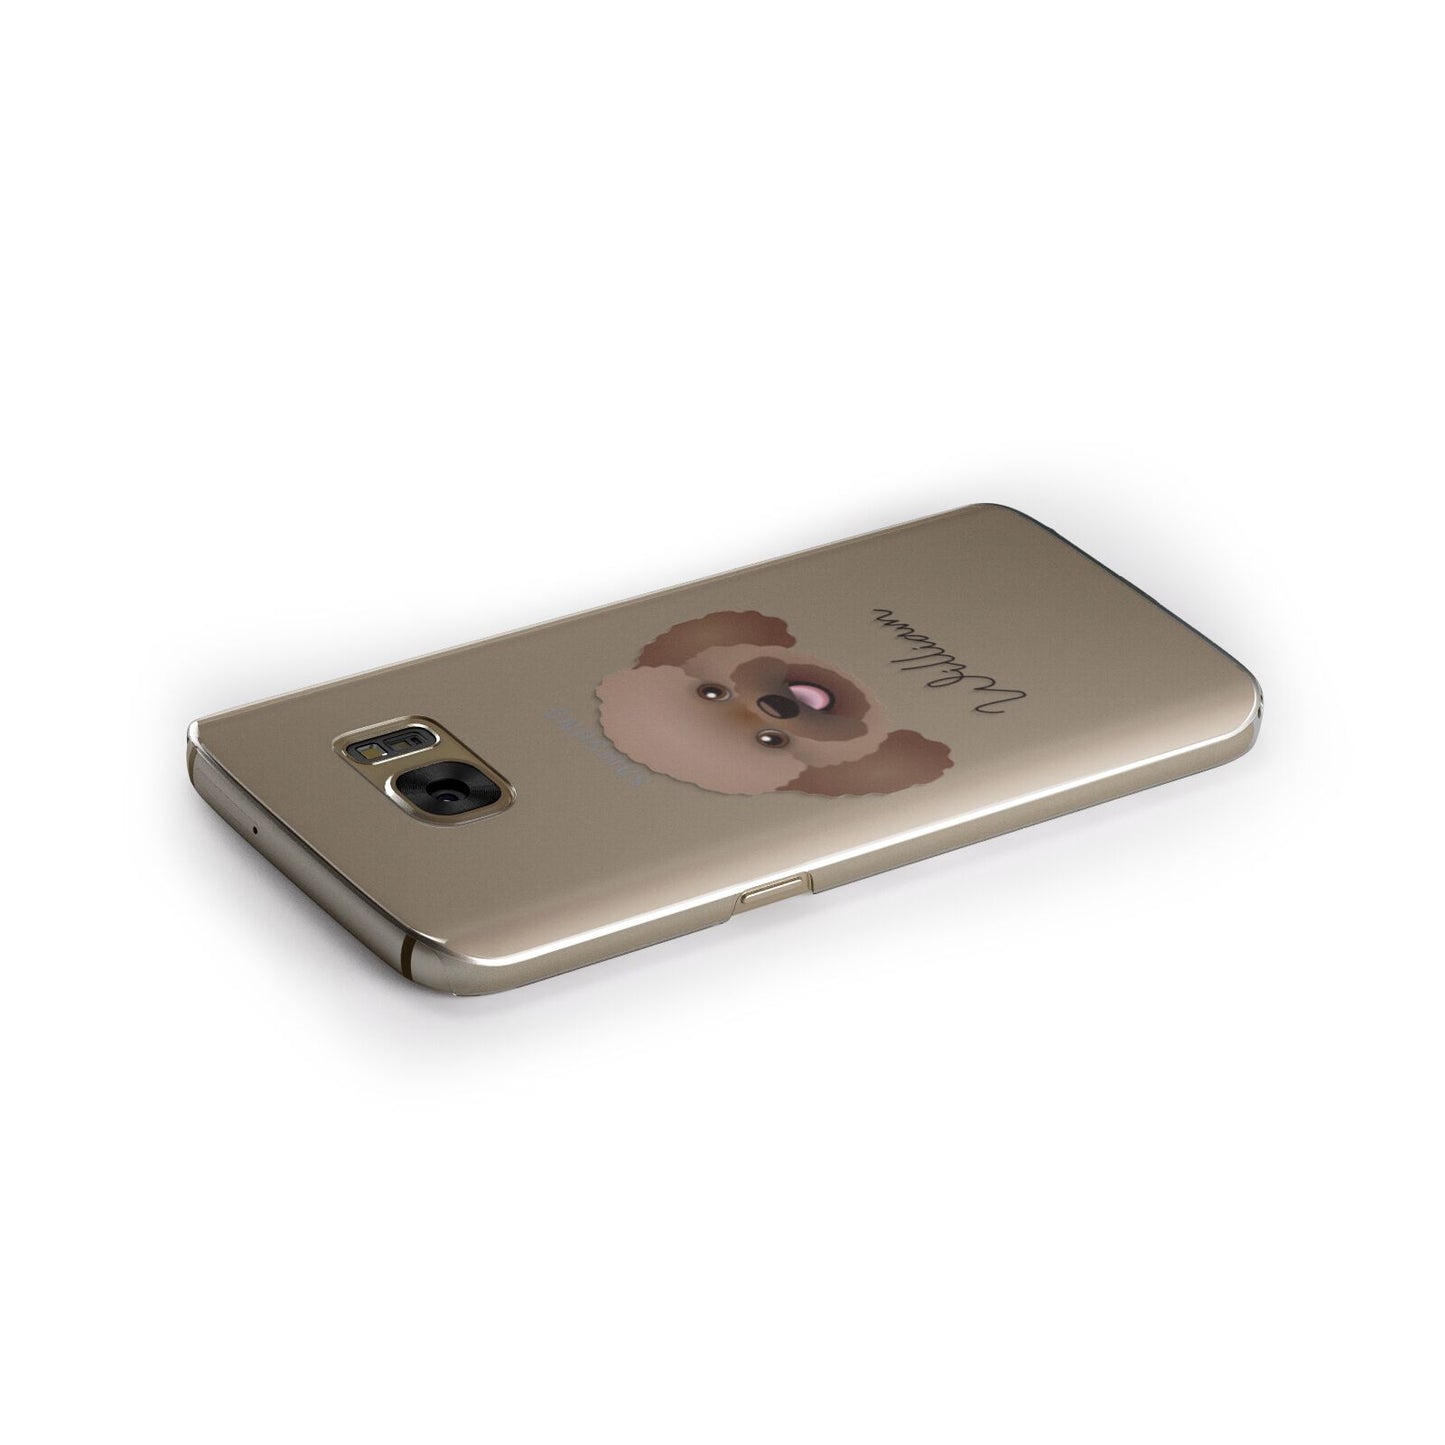 Bich poo Personalised Samsung Galaxy Case Side Close Up